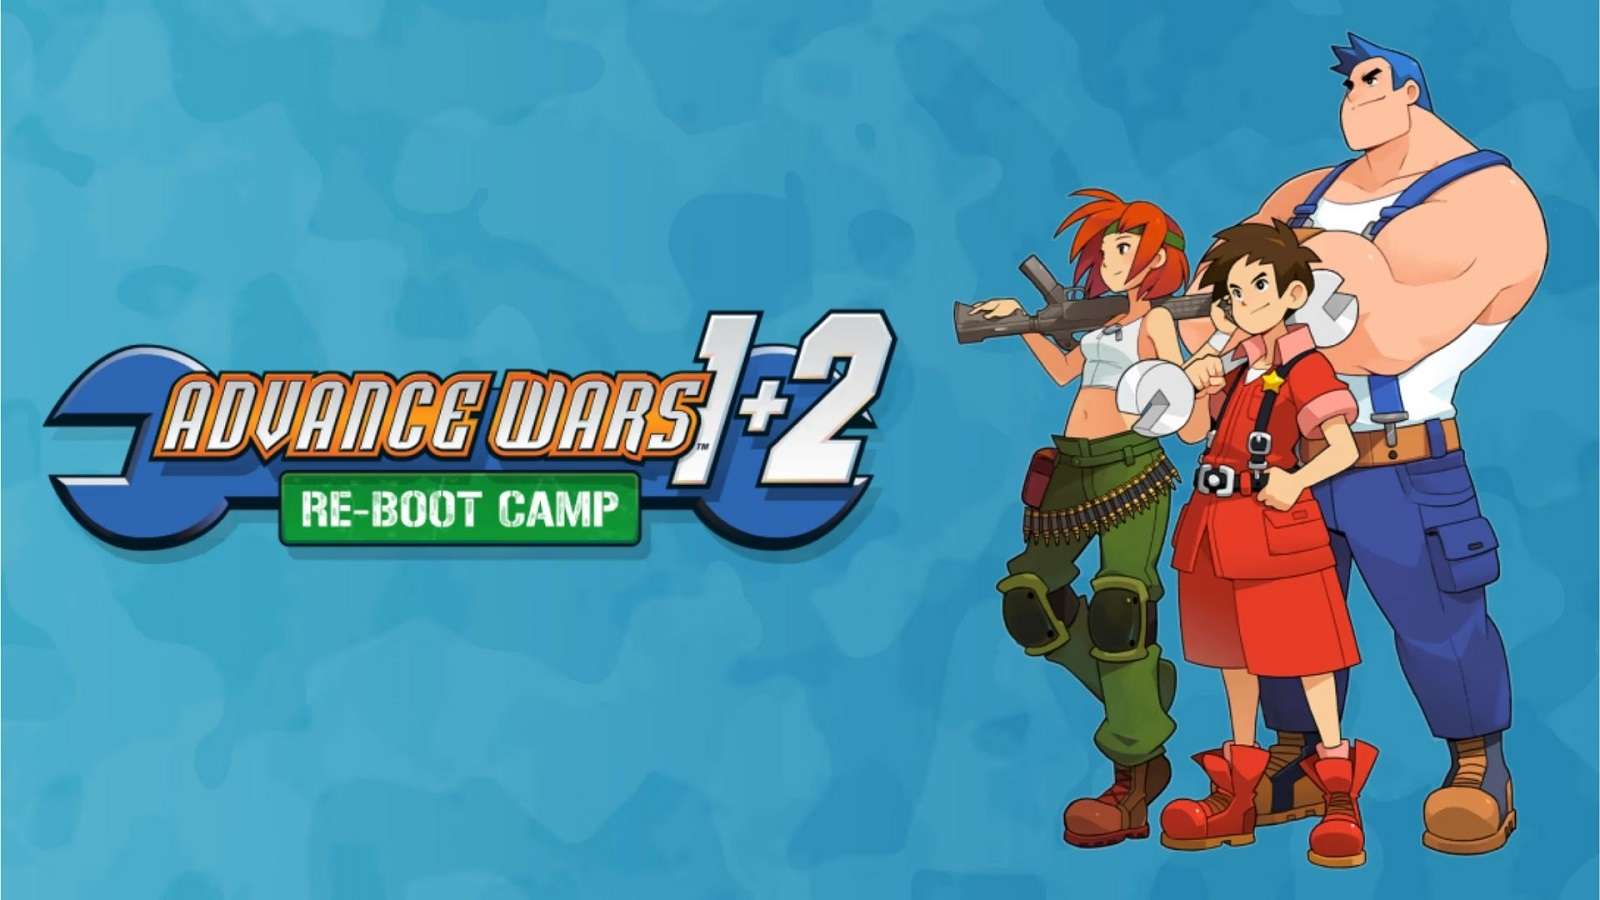 Advance Wars 1+2 Re-Boot Camp characters